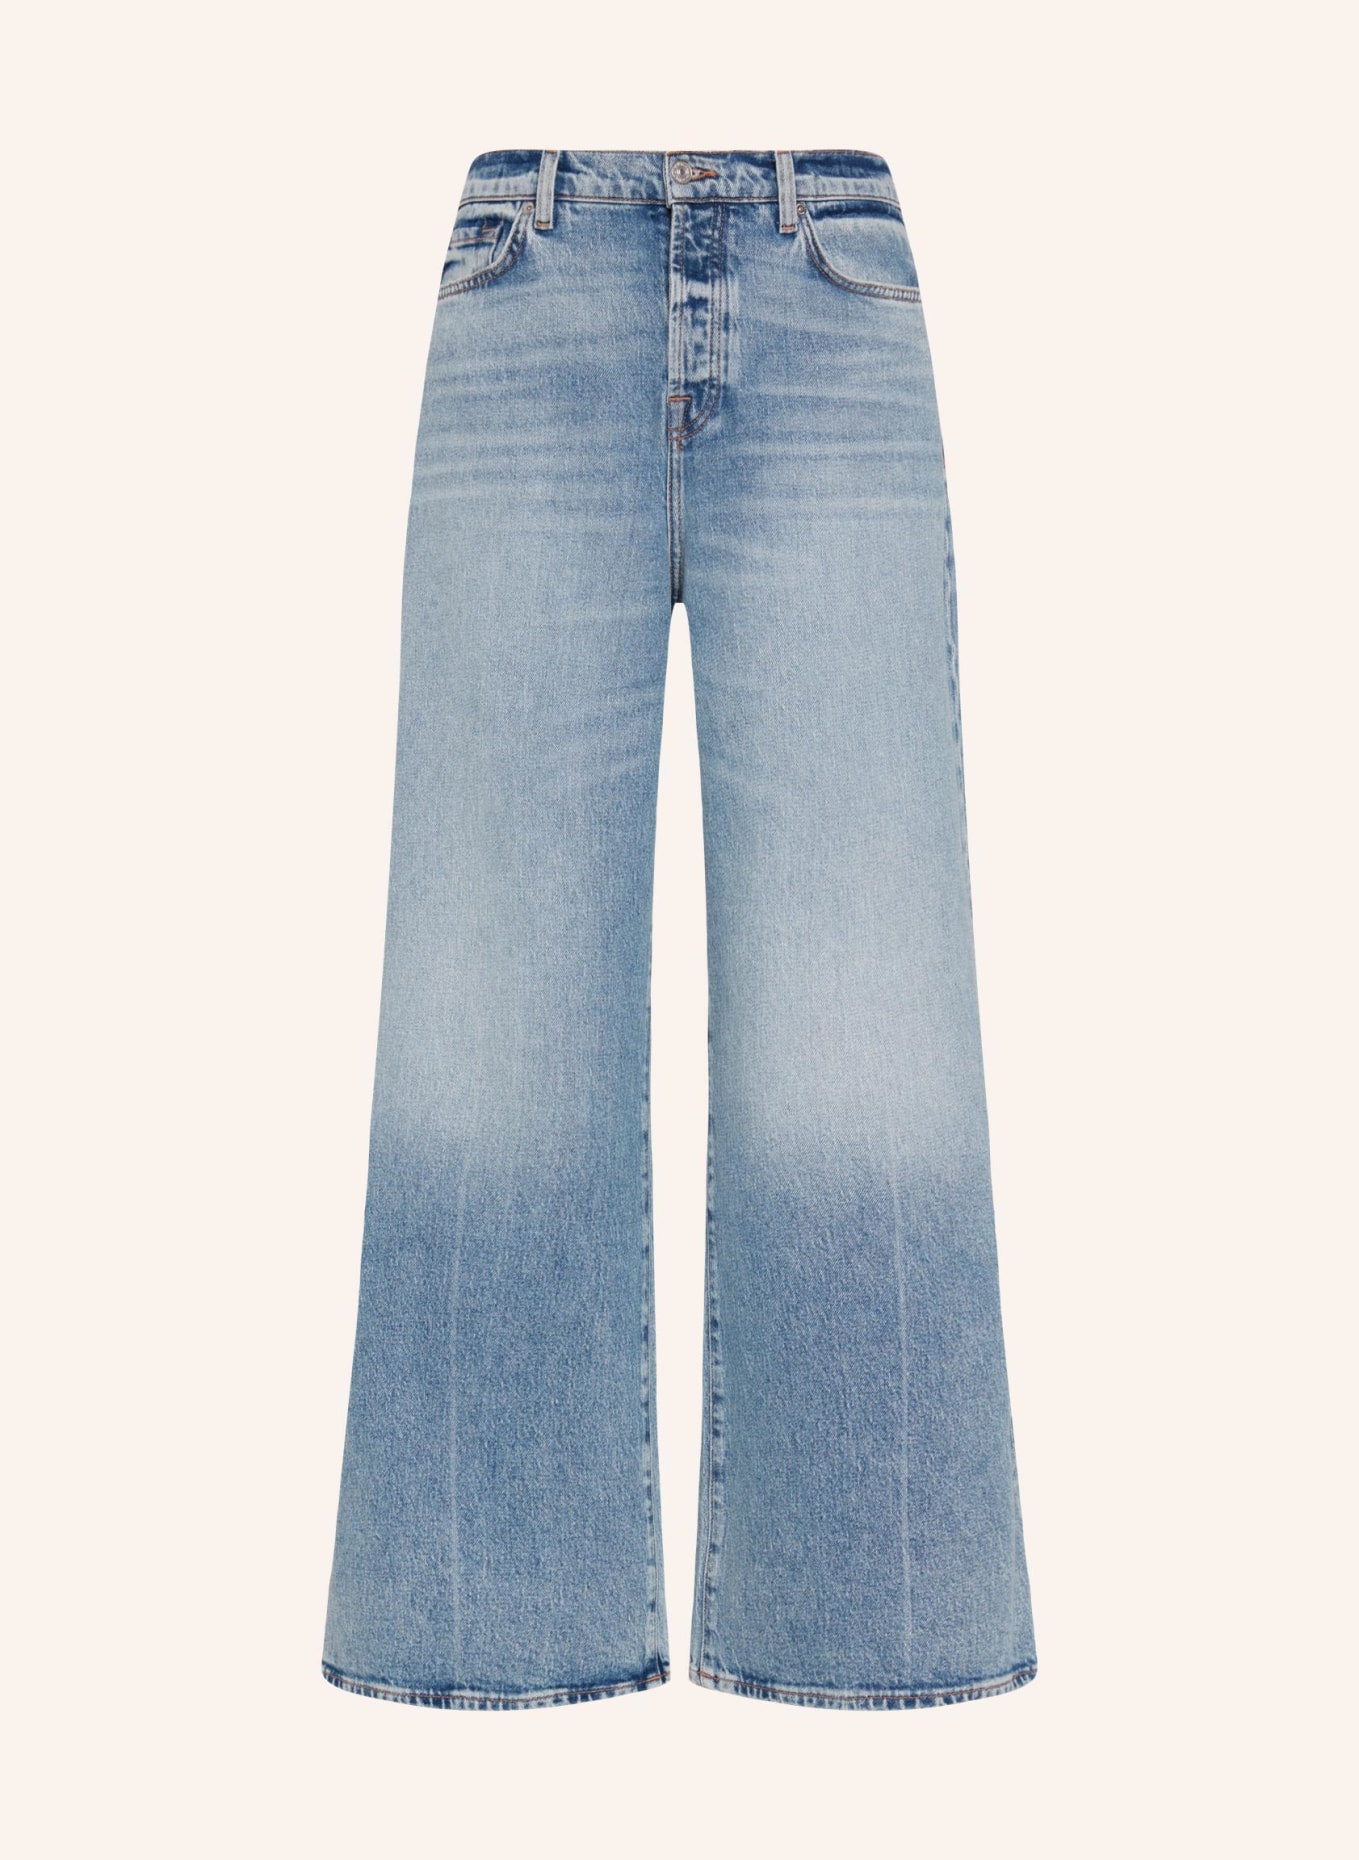 7 for all mankind Jeans ZOEY Flare Fit, Farbe: BLAU (Bild 1)